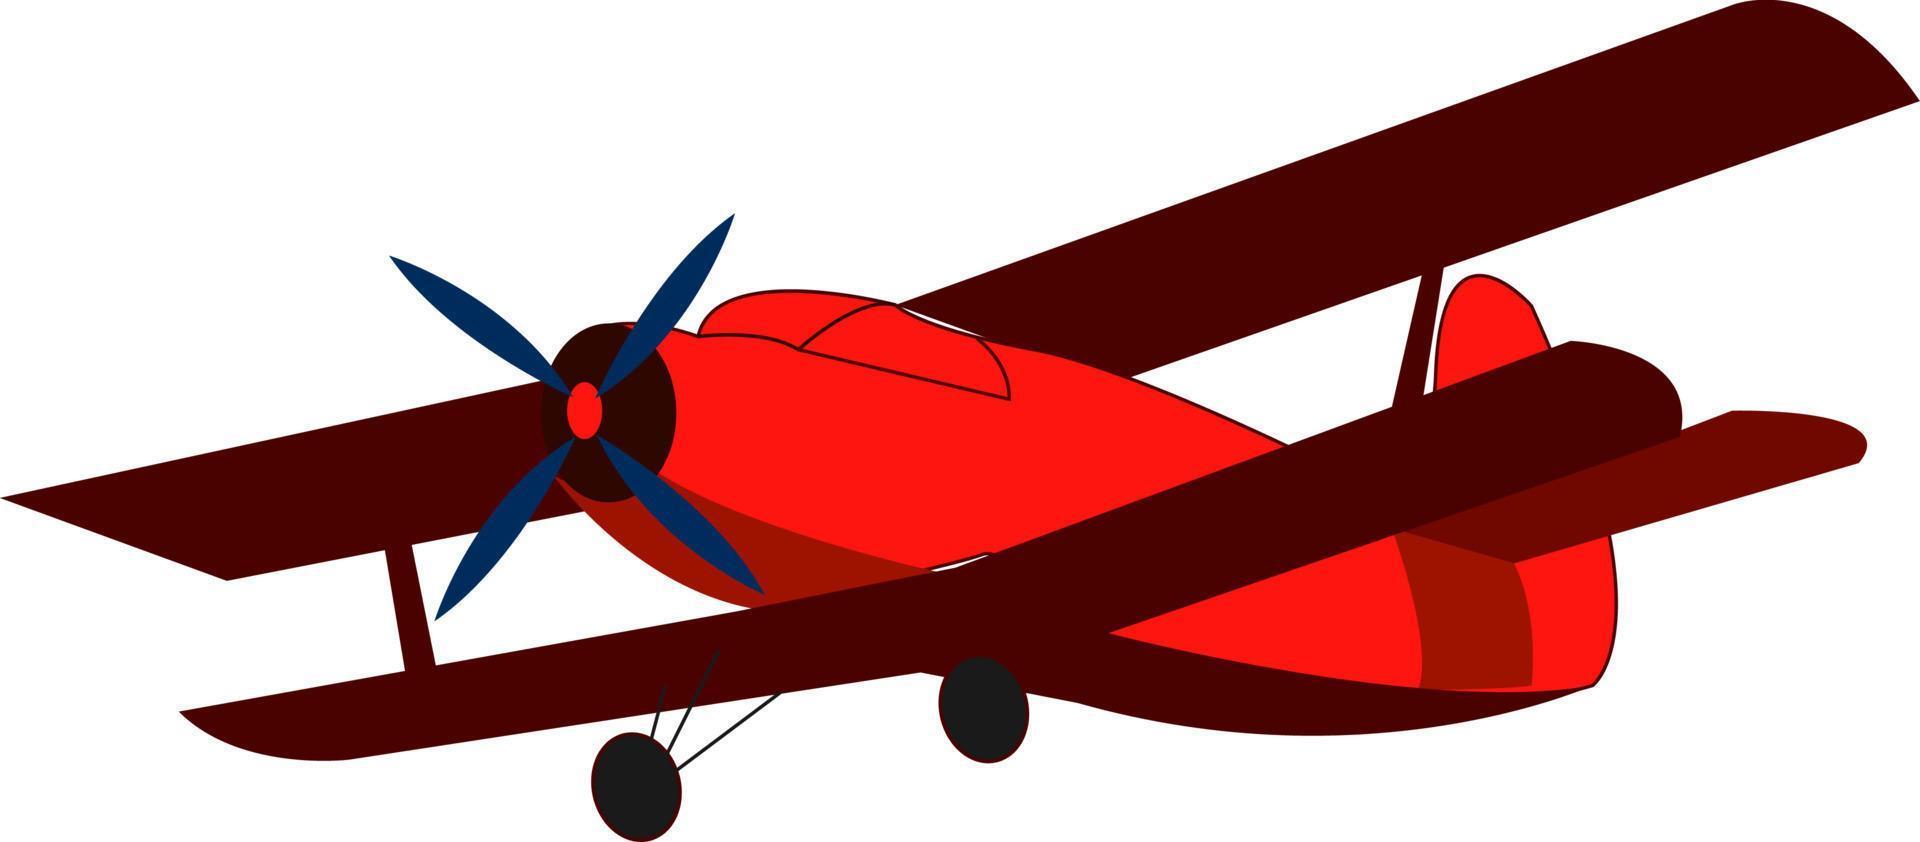 Red retro airplane, illustration, vector on white background.